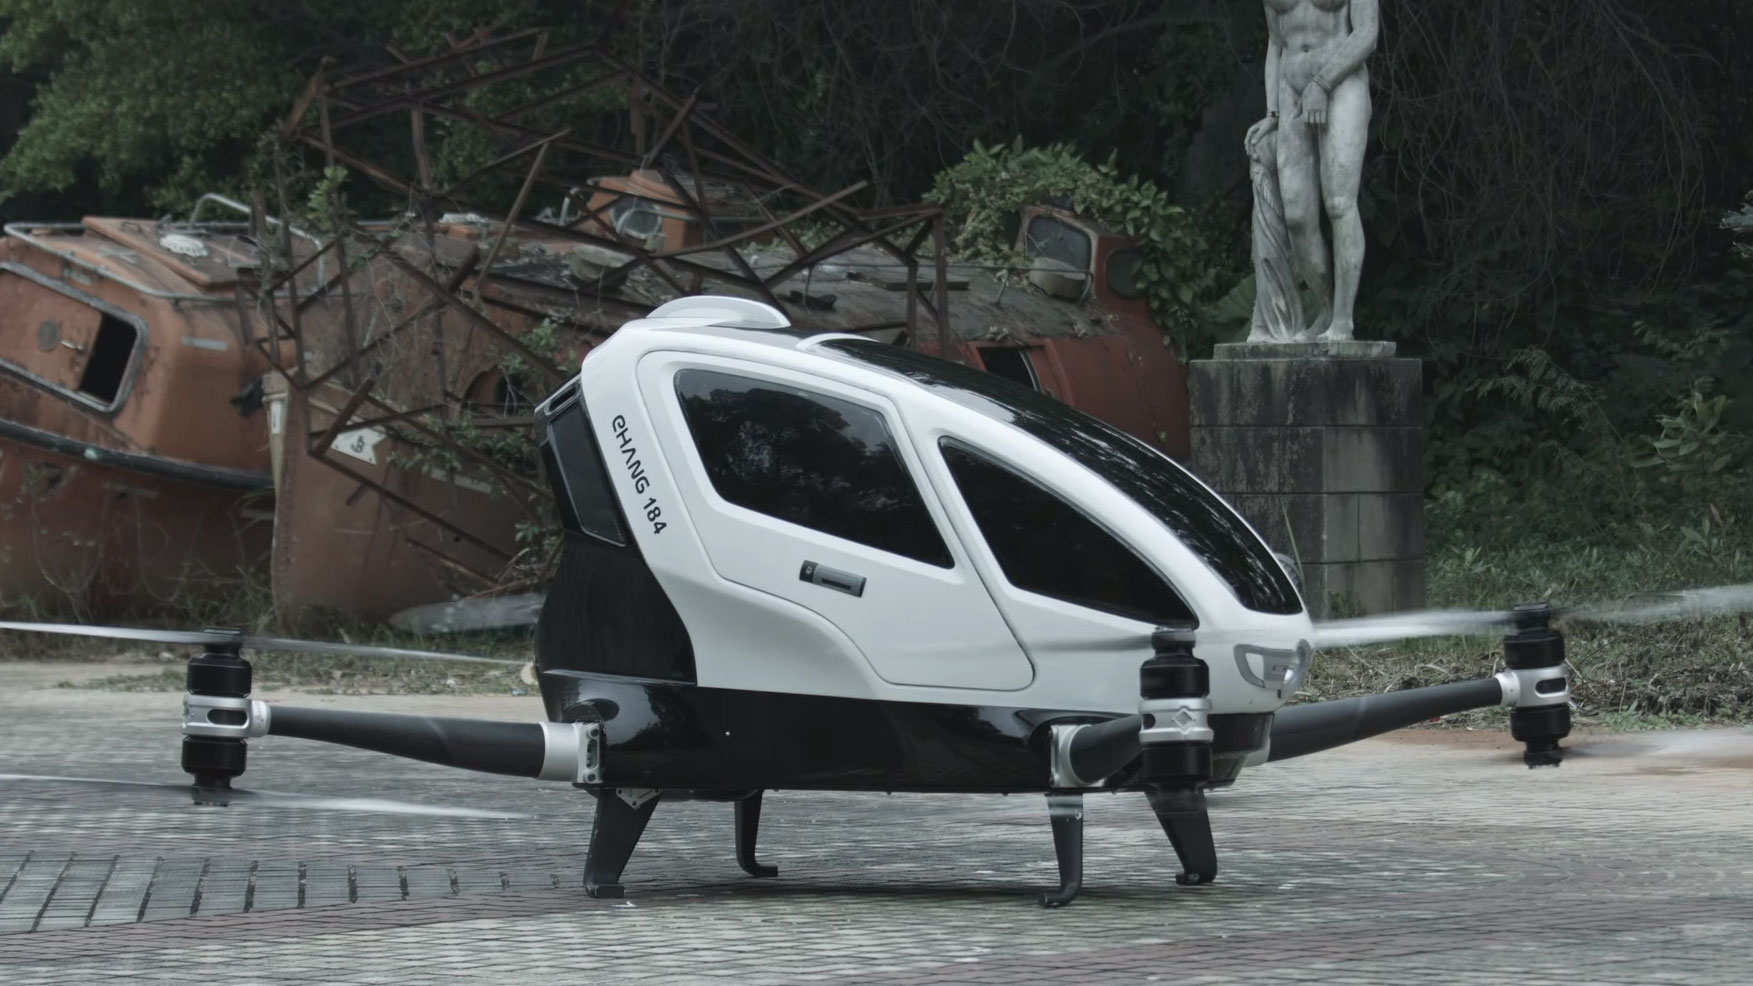 Fødested Vugge Uretfærdighed World's first human-carrying drone is the closest we've come to a flying car  | TechRadar